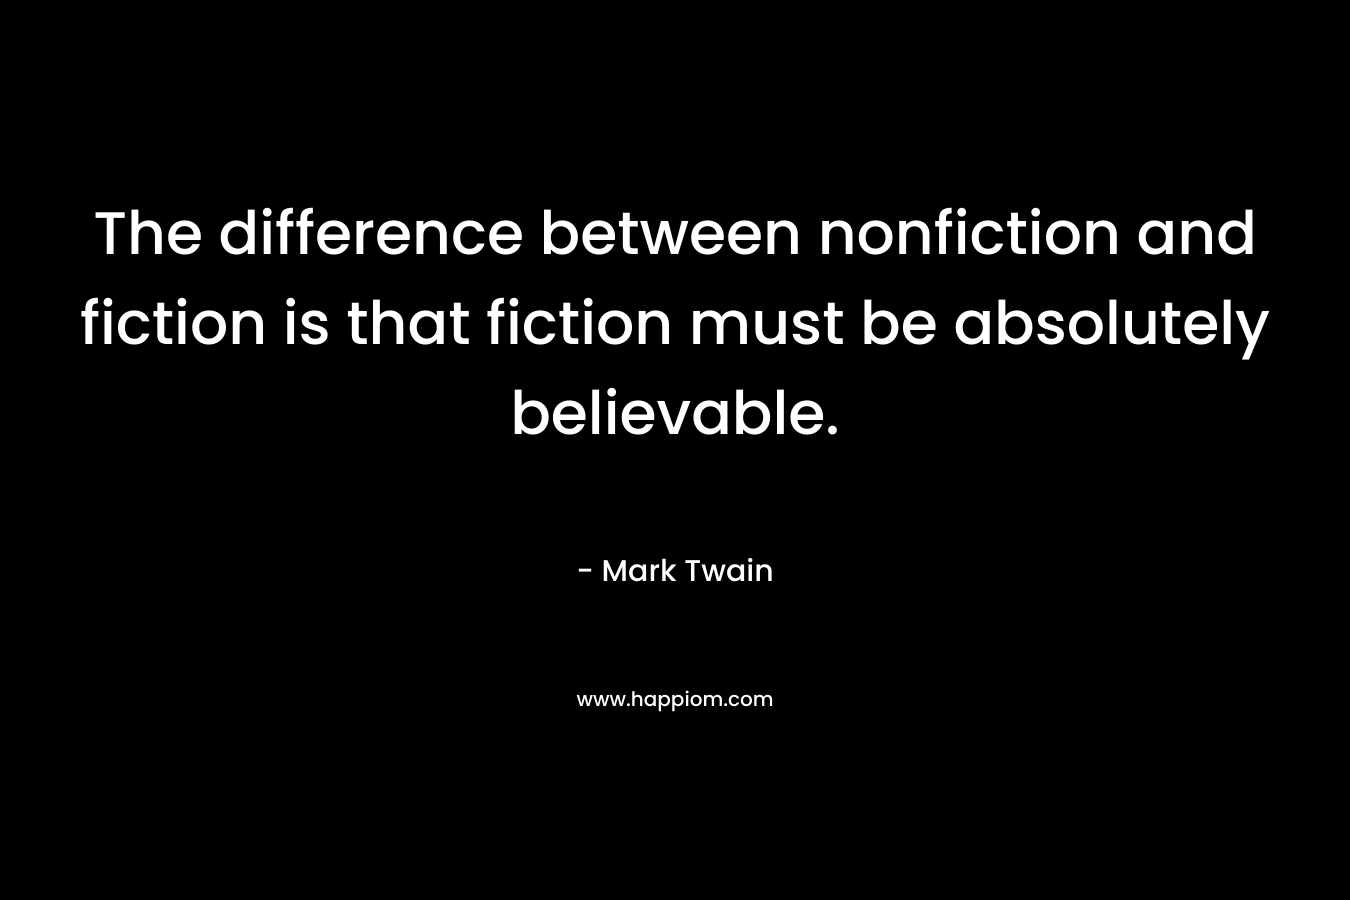 The difference between nonfiction and fiction is that fiction must be absolutely believable. – Mark Twain